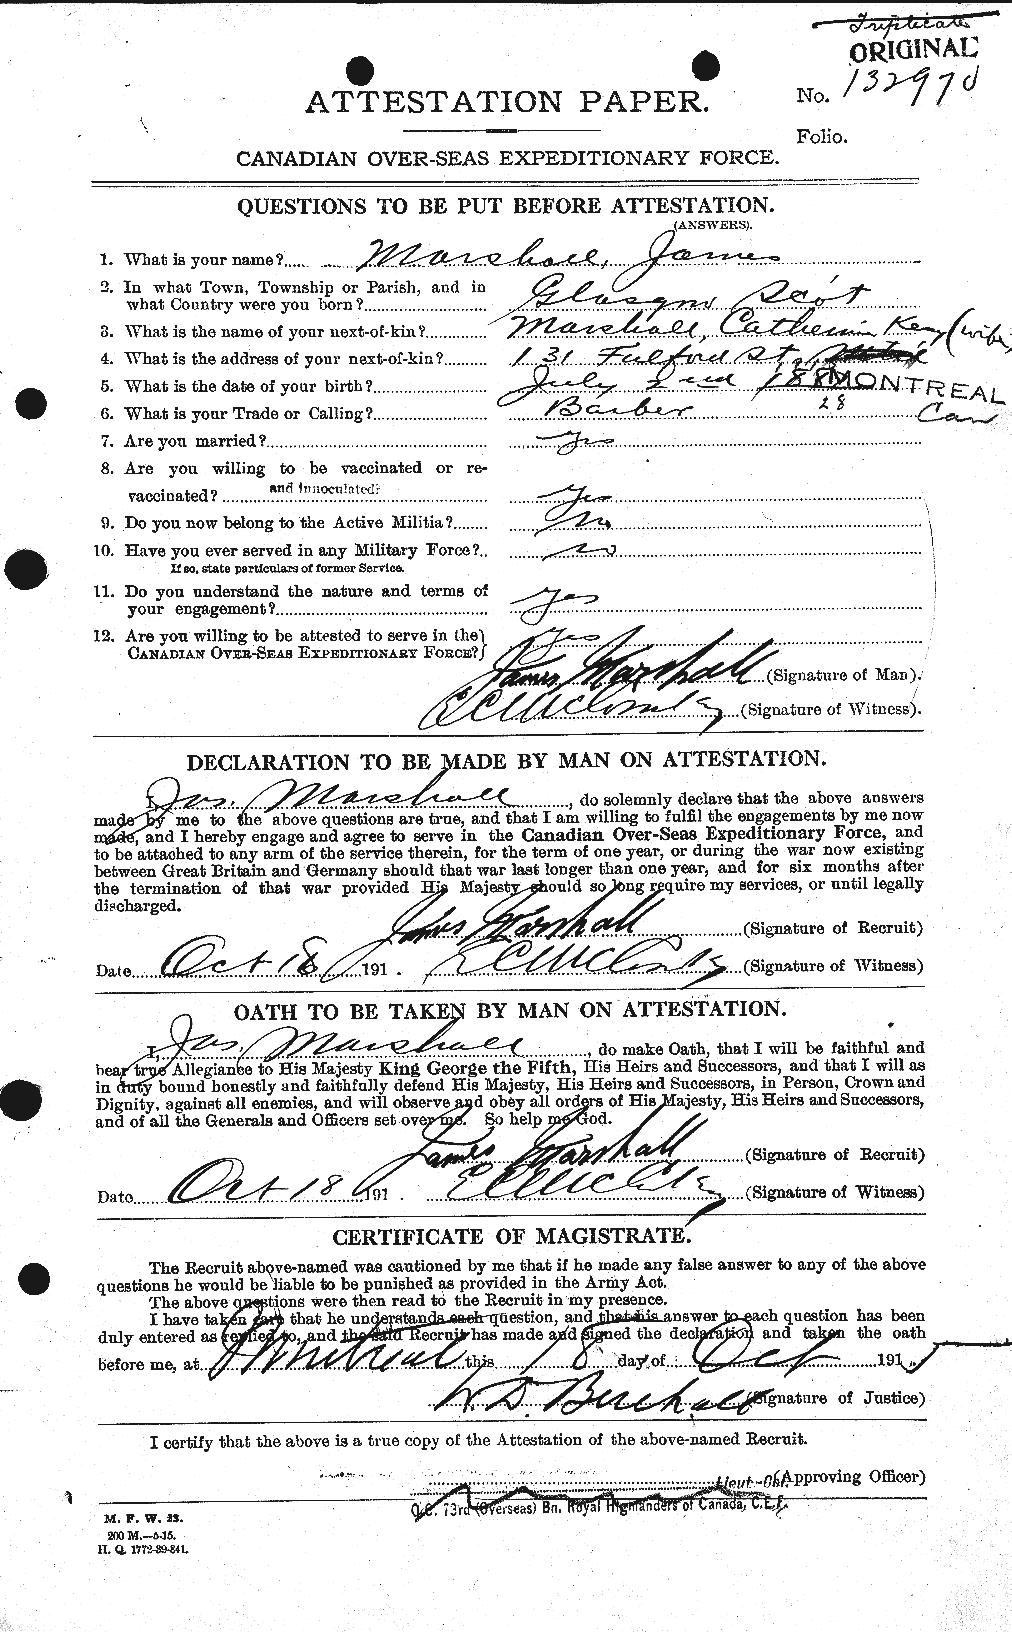 Personnel Records of the First World War - CEF 484321a